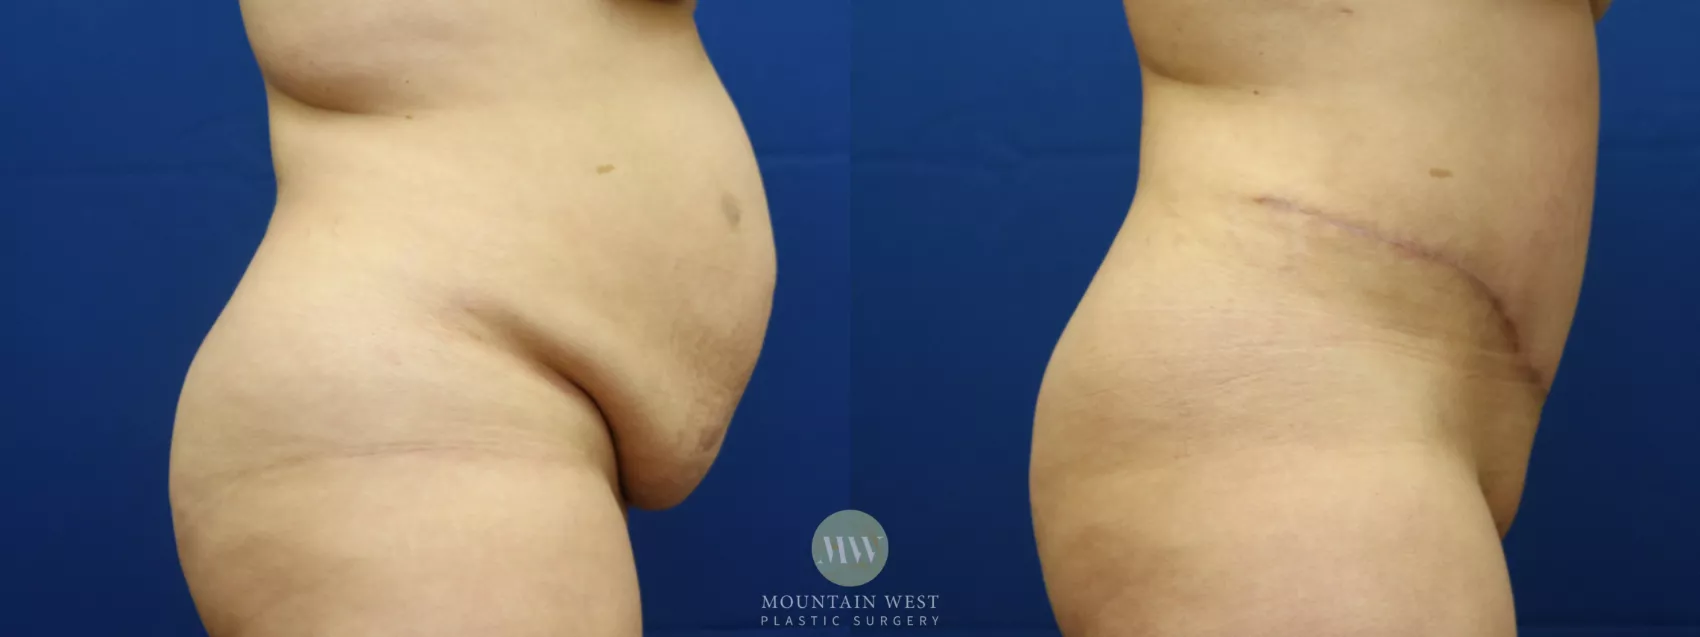 Breast Reduction Before and After Pictures Case 70, Kalispell, MT